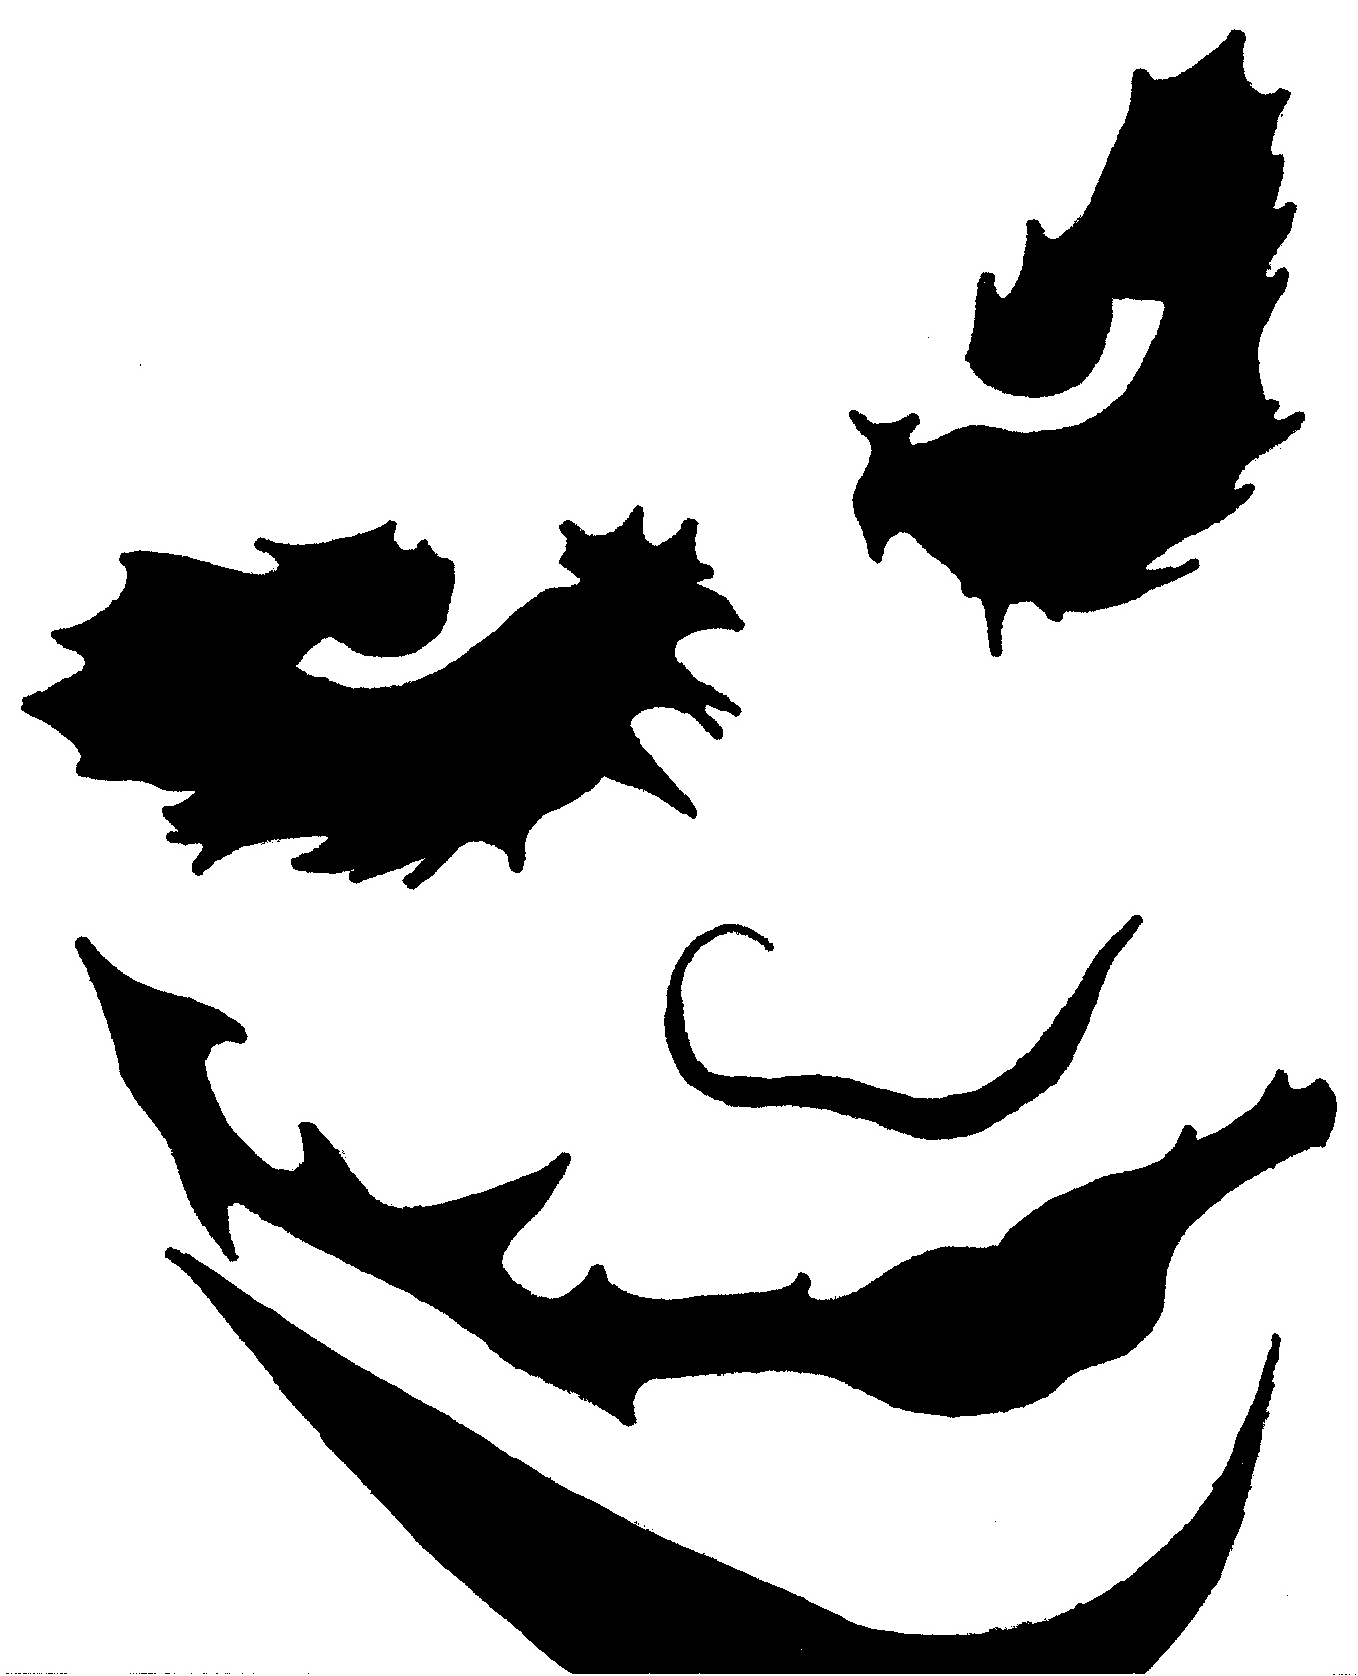 pumpkin stencil - group picture, image by tag - keywordpictures.